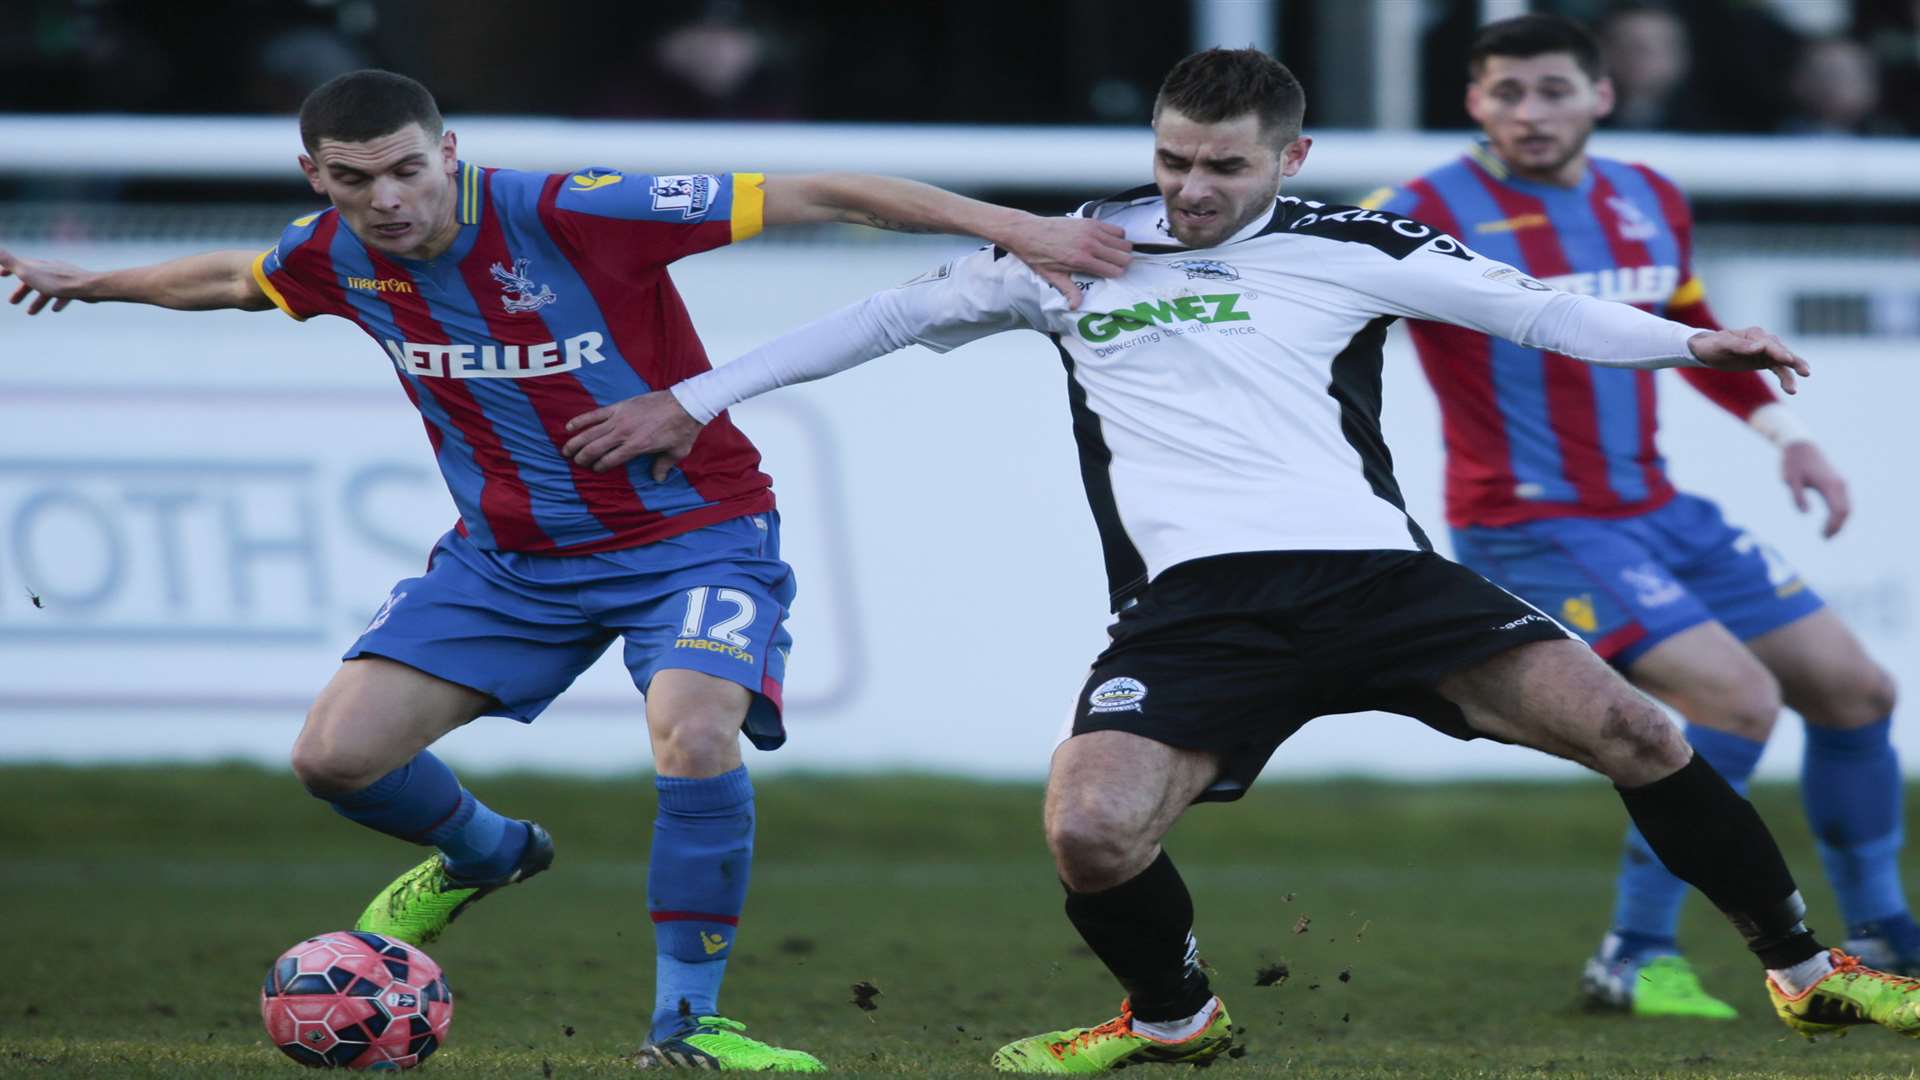 Dover's Nicky Deverdics battles for the ball with Crystal Palace's Stuart O'Keefe in the FA Cup clash at Crabble last season